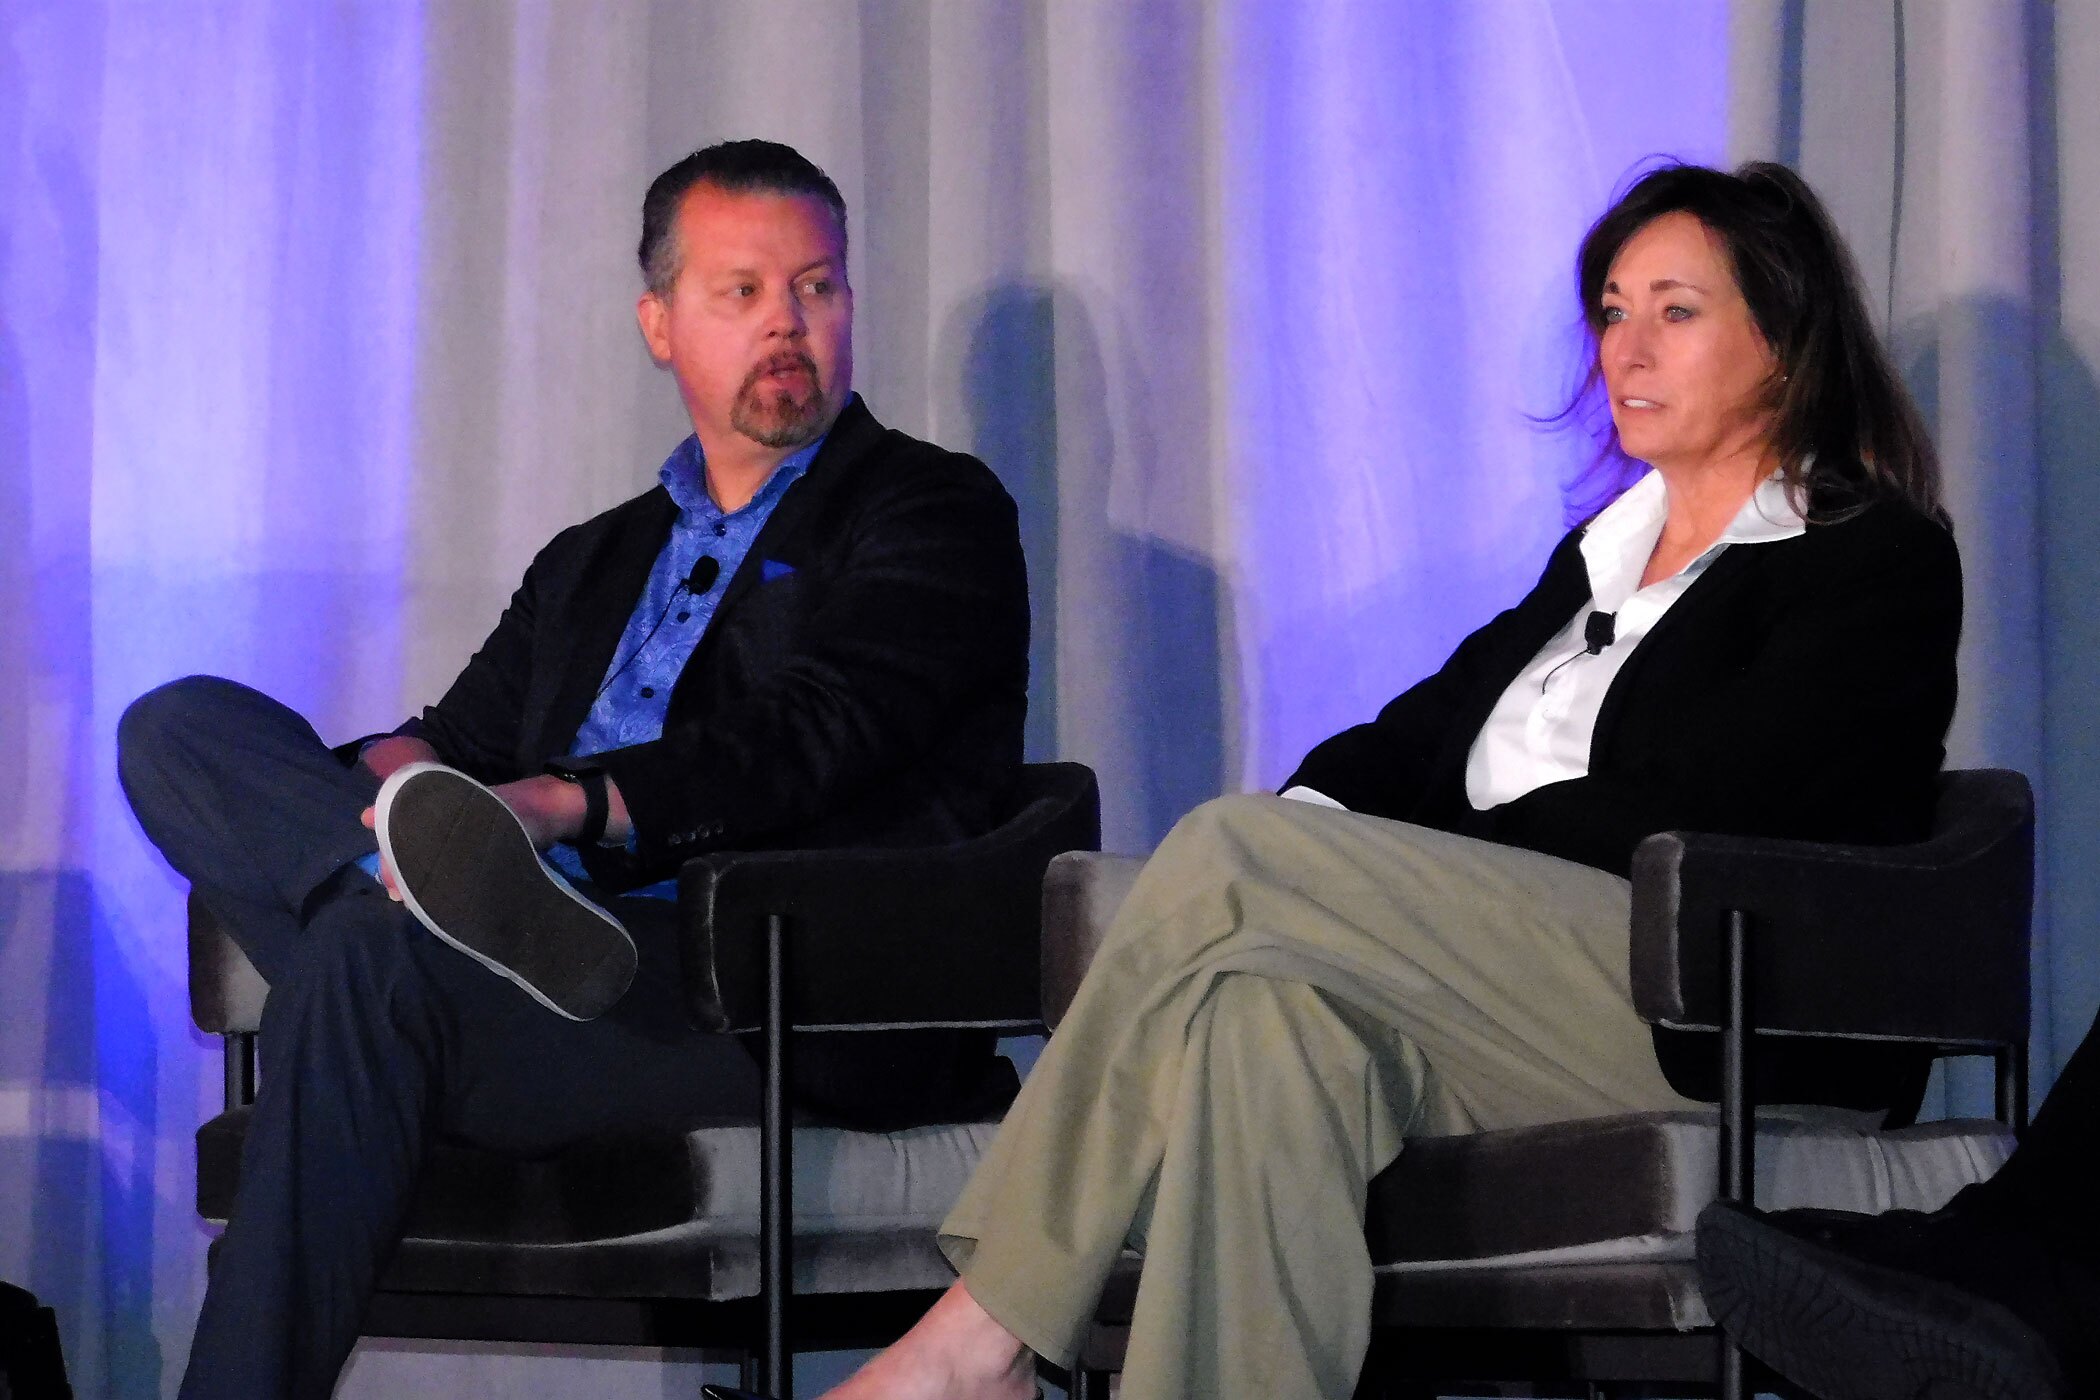 Davidson Hospitality Group's Paul Eckert and JLL's Lori Horvath speak at the Hospitality Asset Managers Association's Spring 2023 Conference. (Sean McCracken)